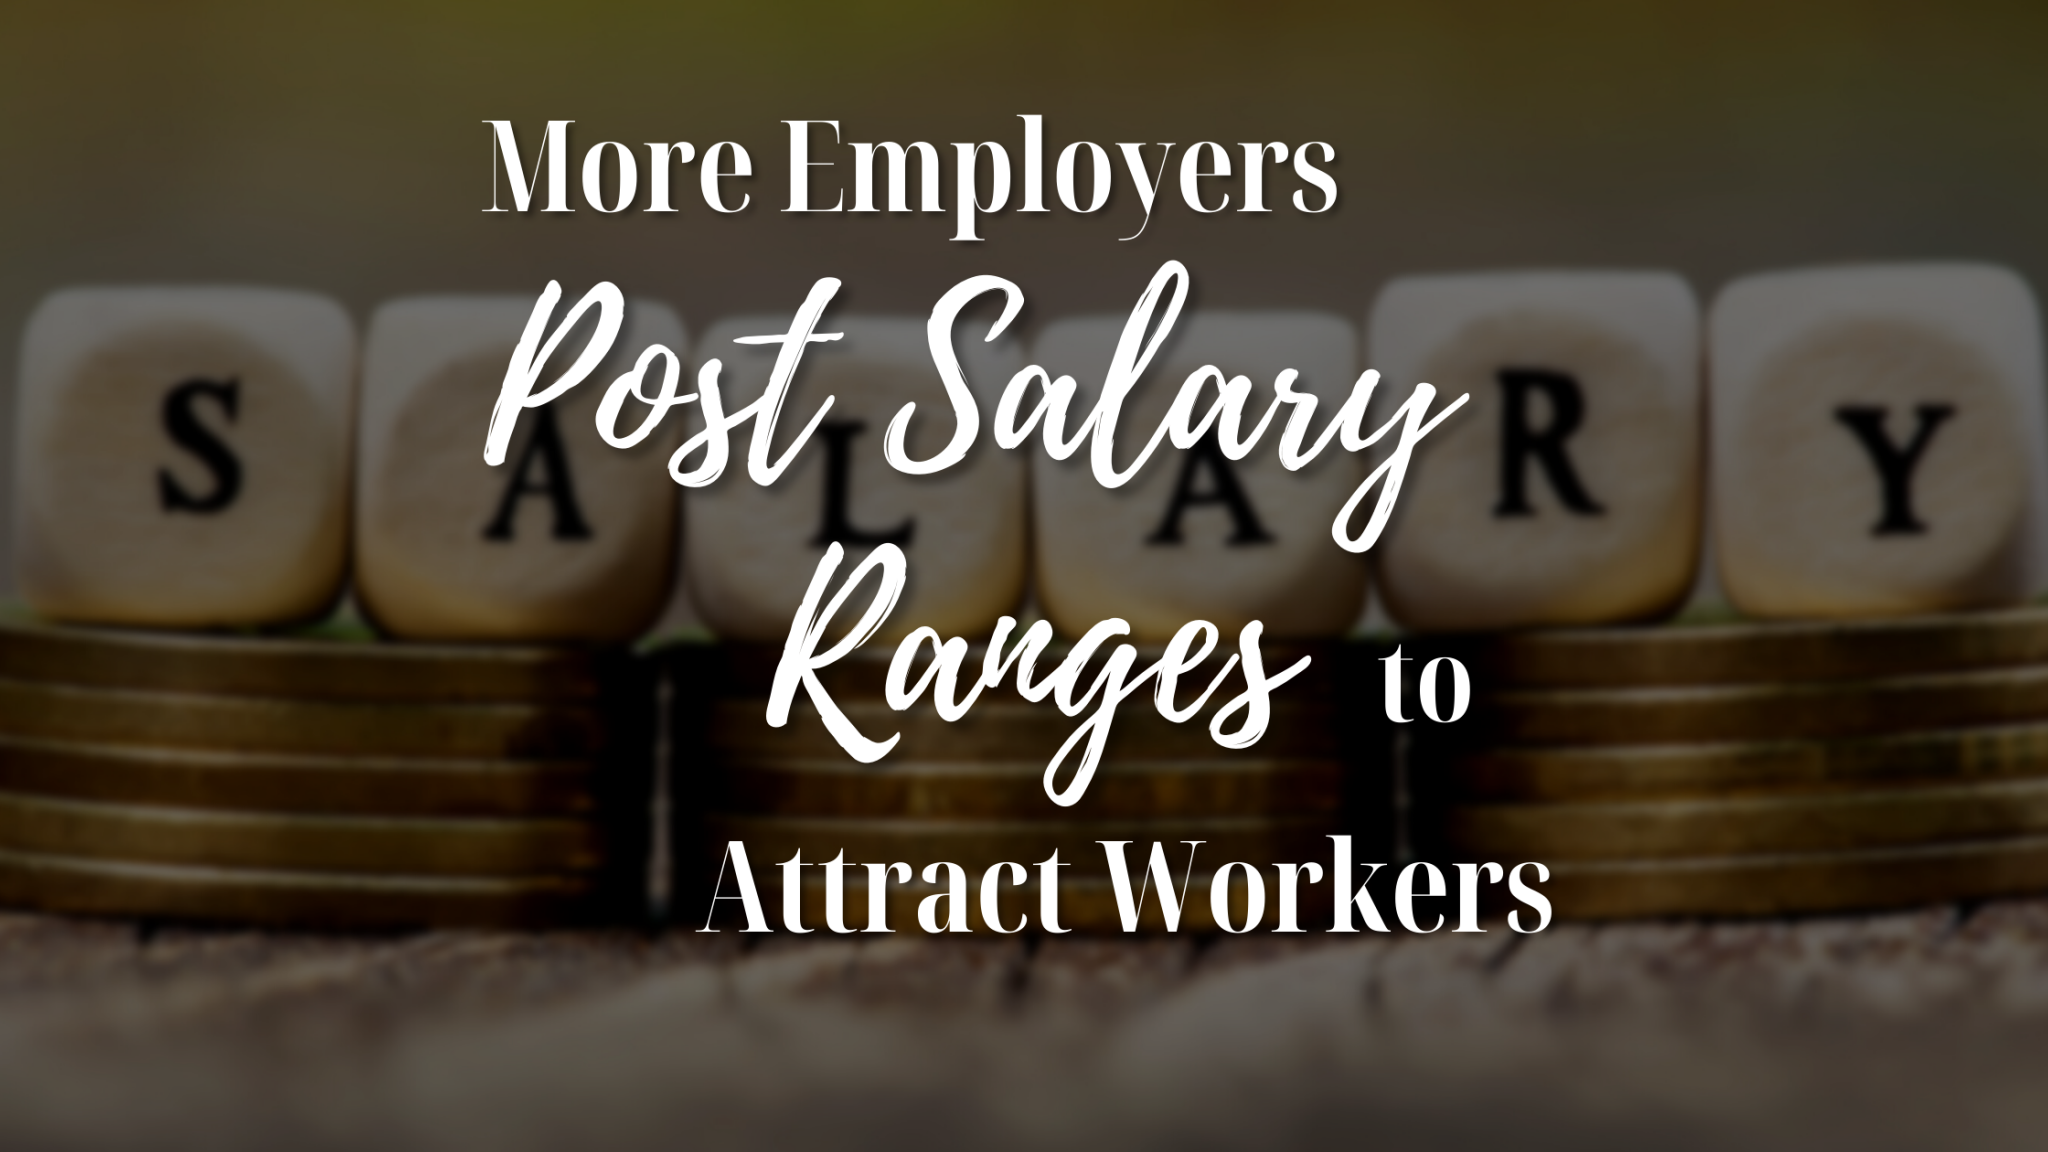 More Employers Post Salary Ranges to Attract Workers